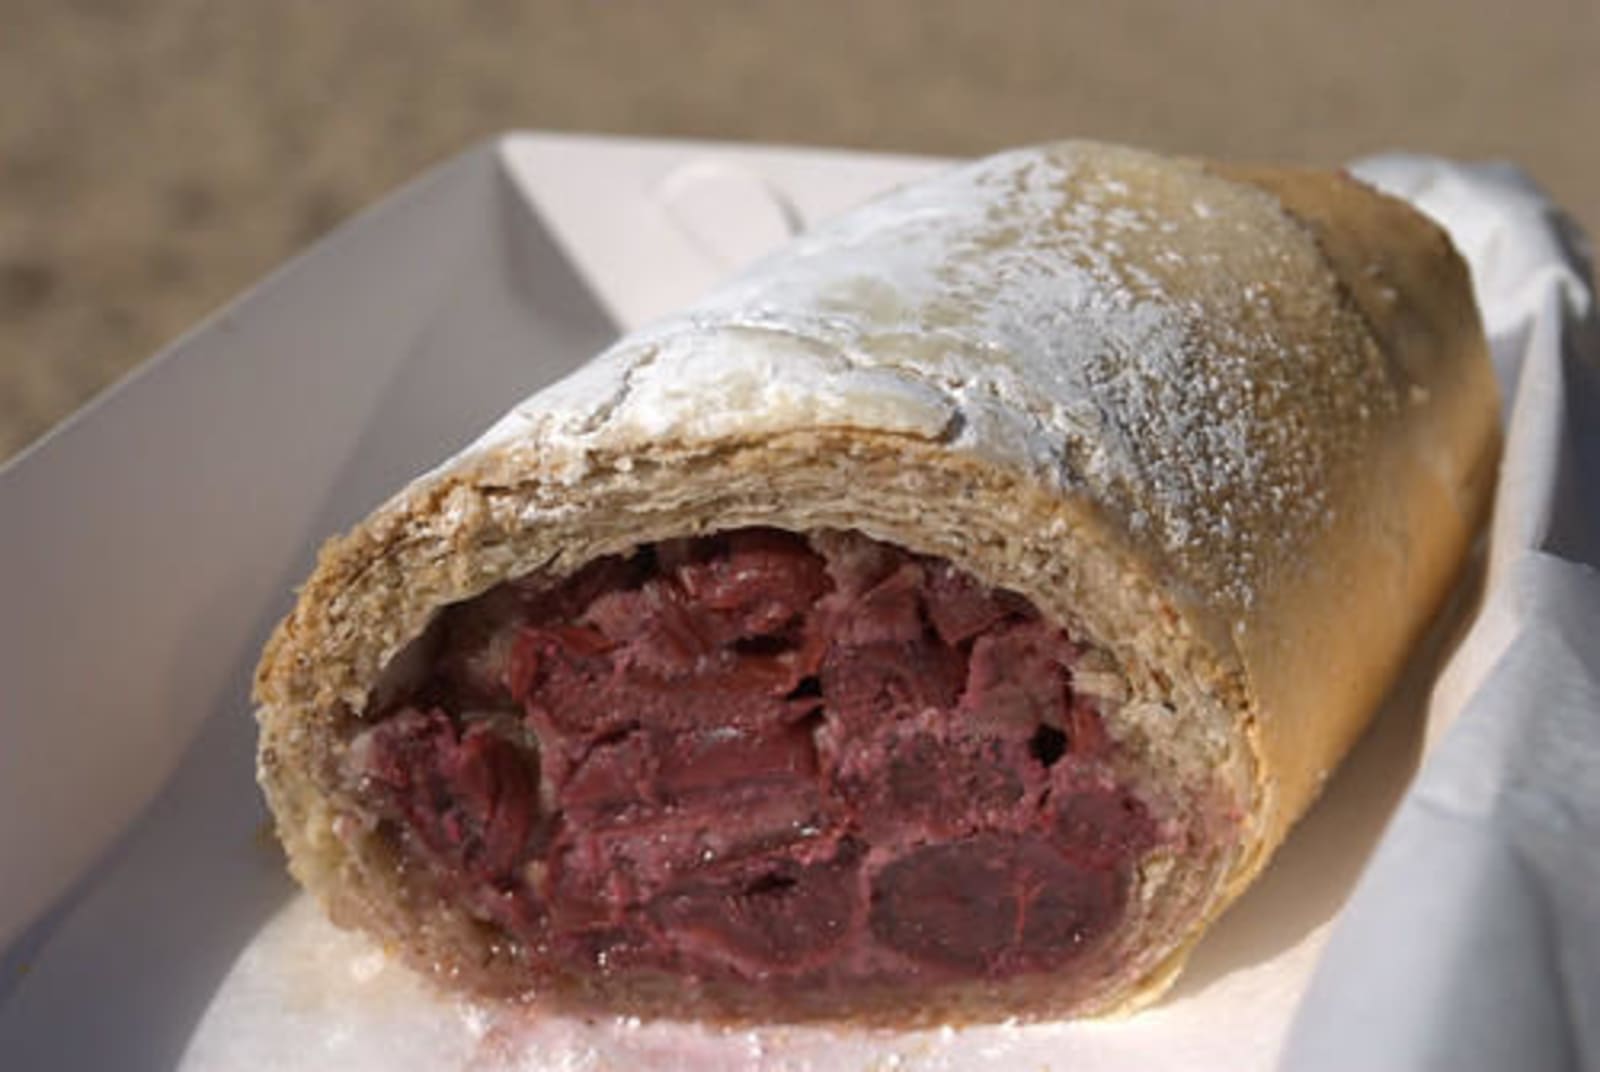 Cherry strudel - a deep maroon filling with crusty pastry dusted with sugar